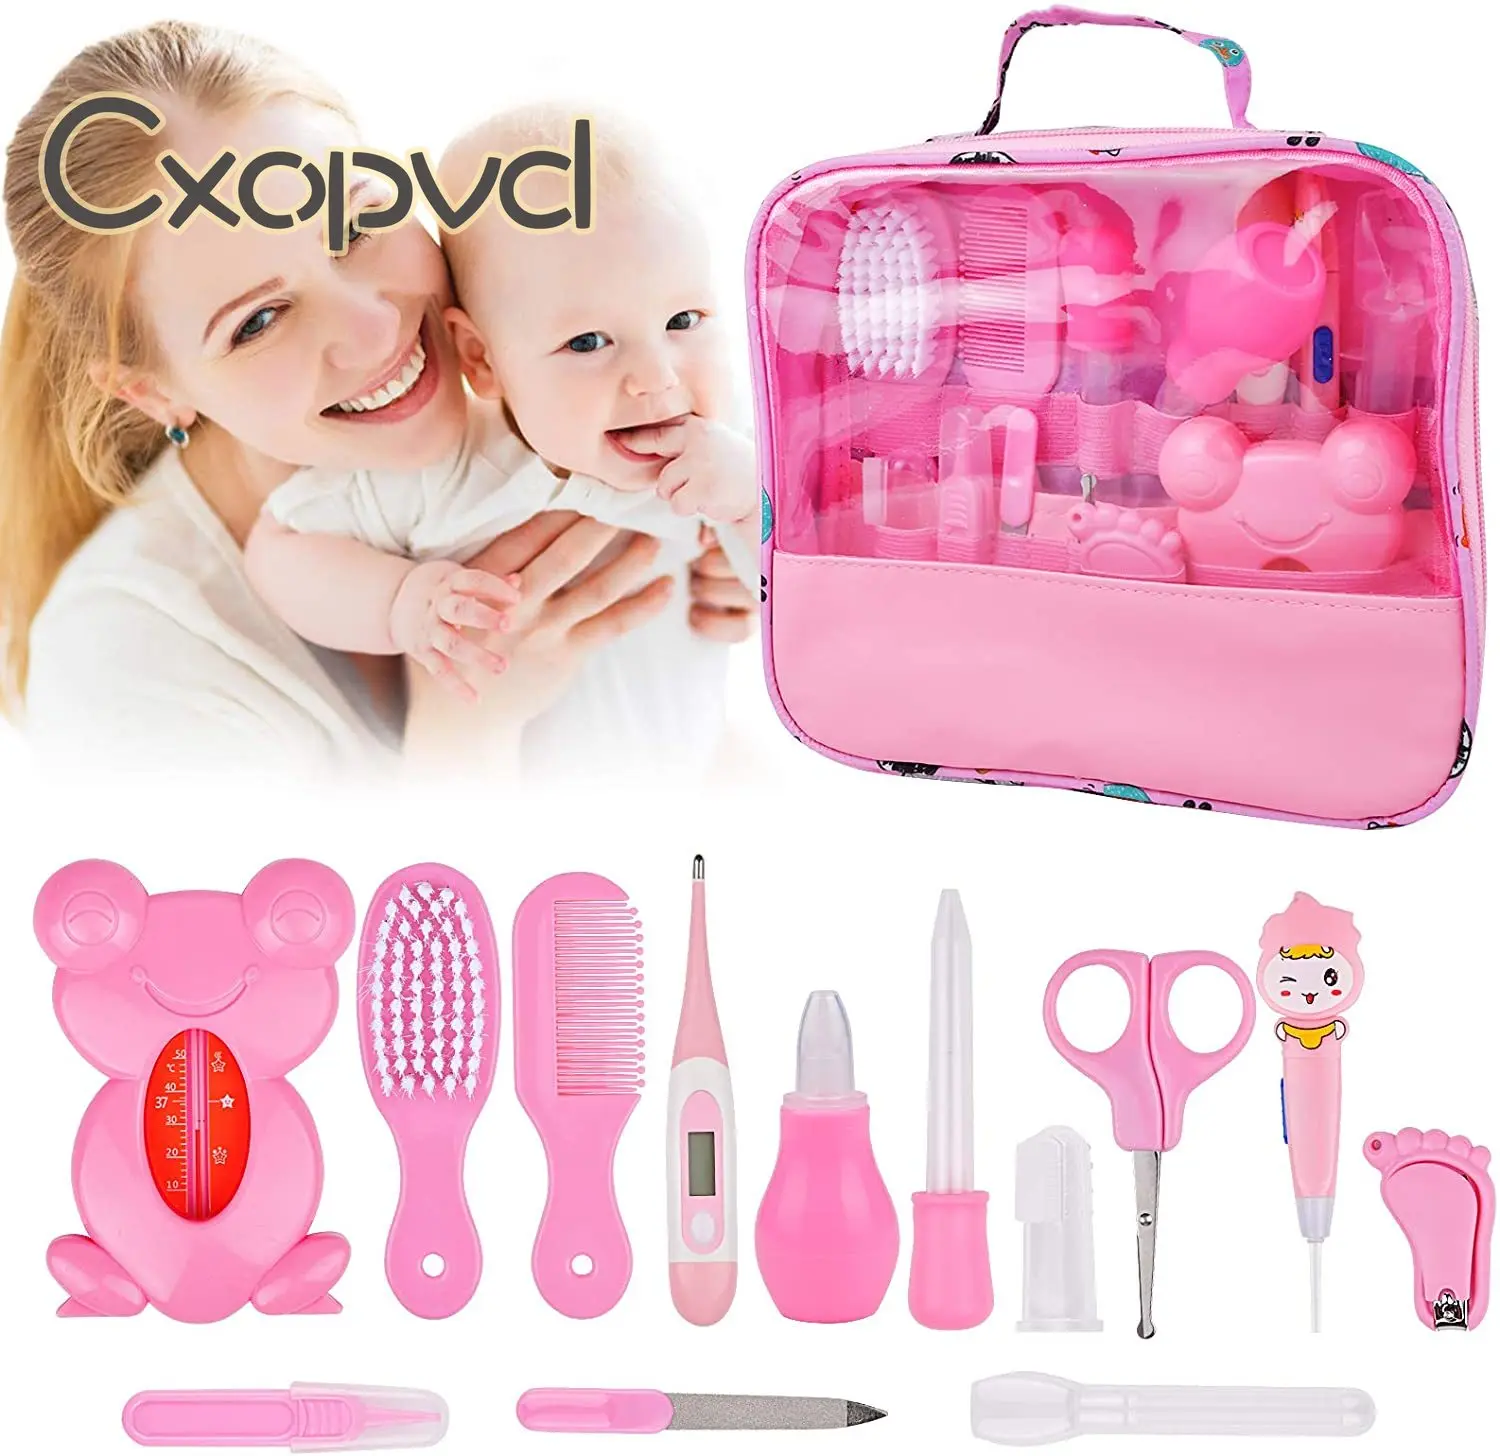 Baby Care 13 In 1 Newborn Essentials Stuff Shower Gifts Nail Clippers Trimmer Products Nursery Care Kits for Newborn Baby